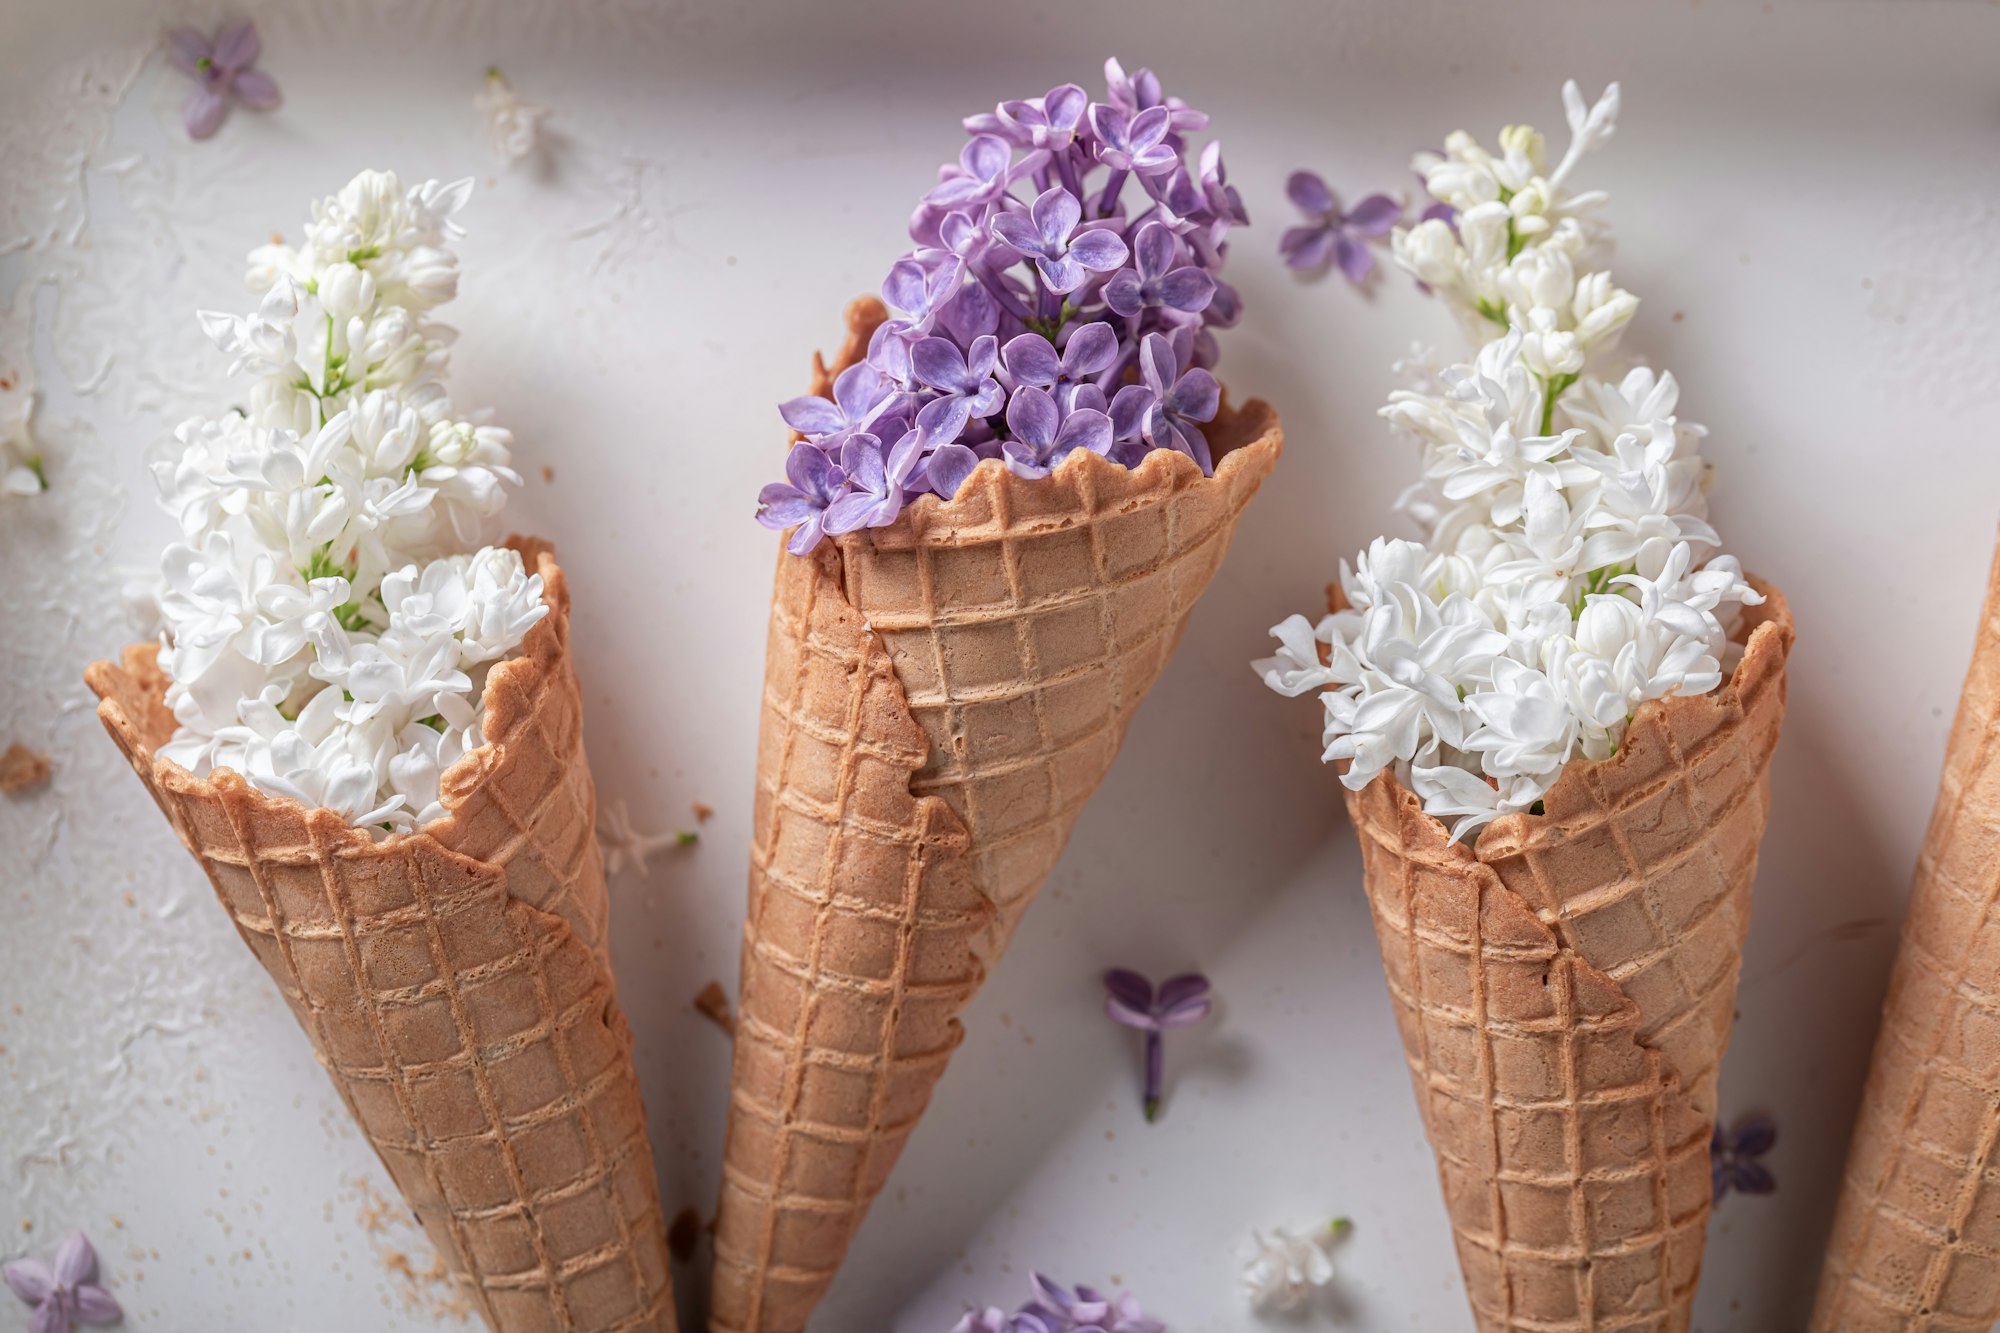 Lovely lilac flowers in wafer cone. Summer flower composition.